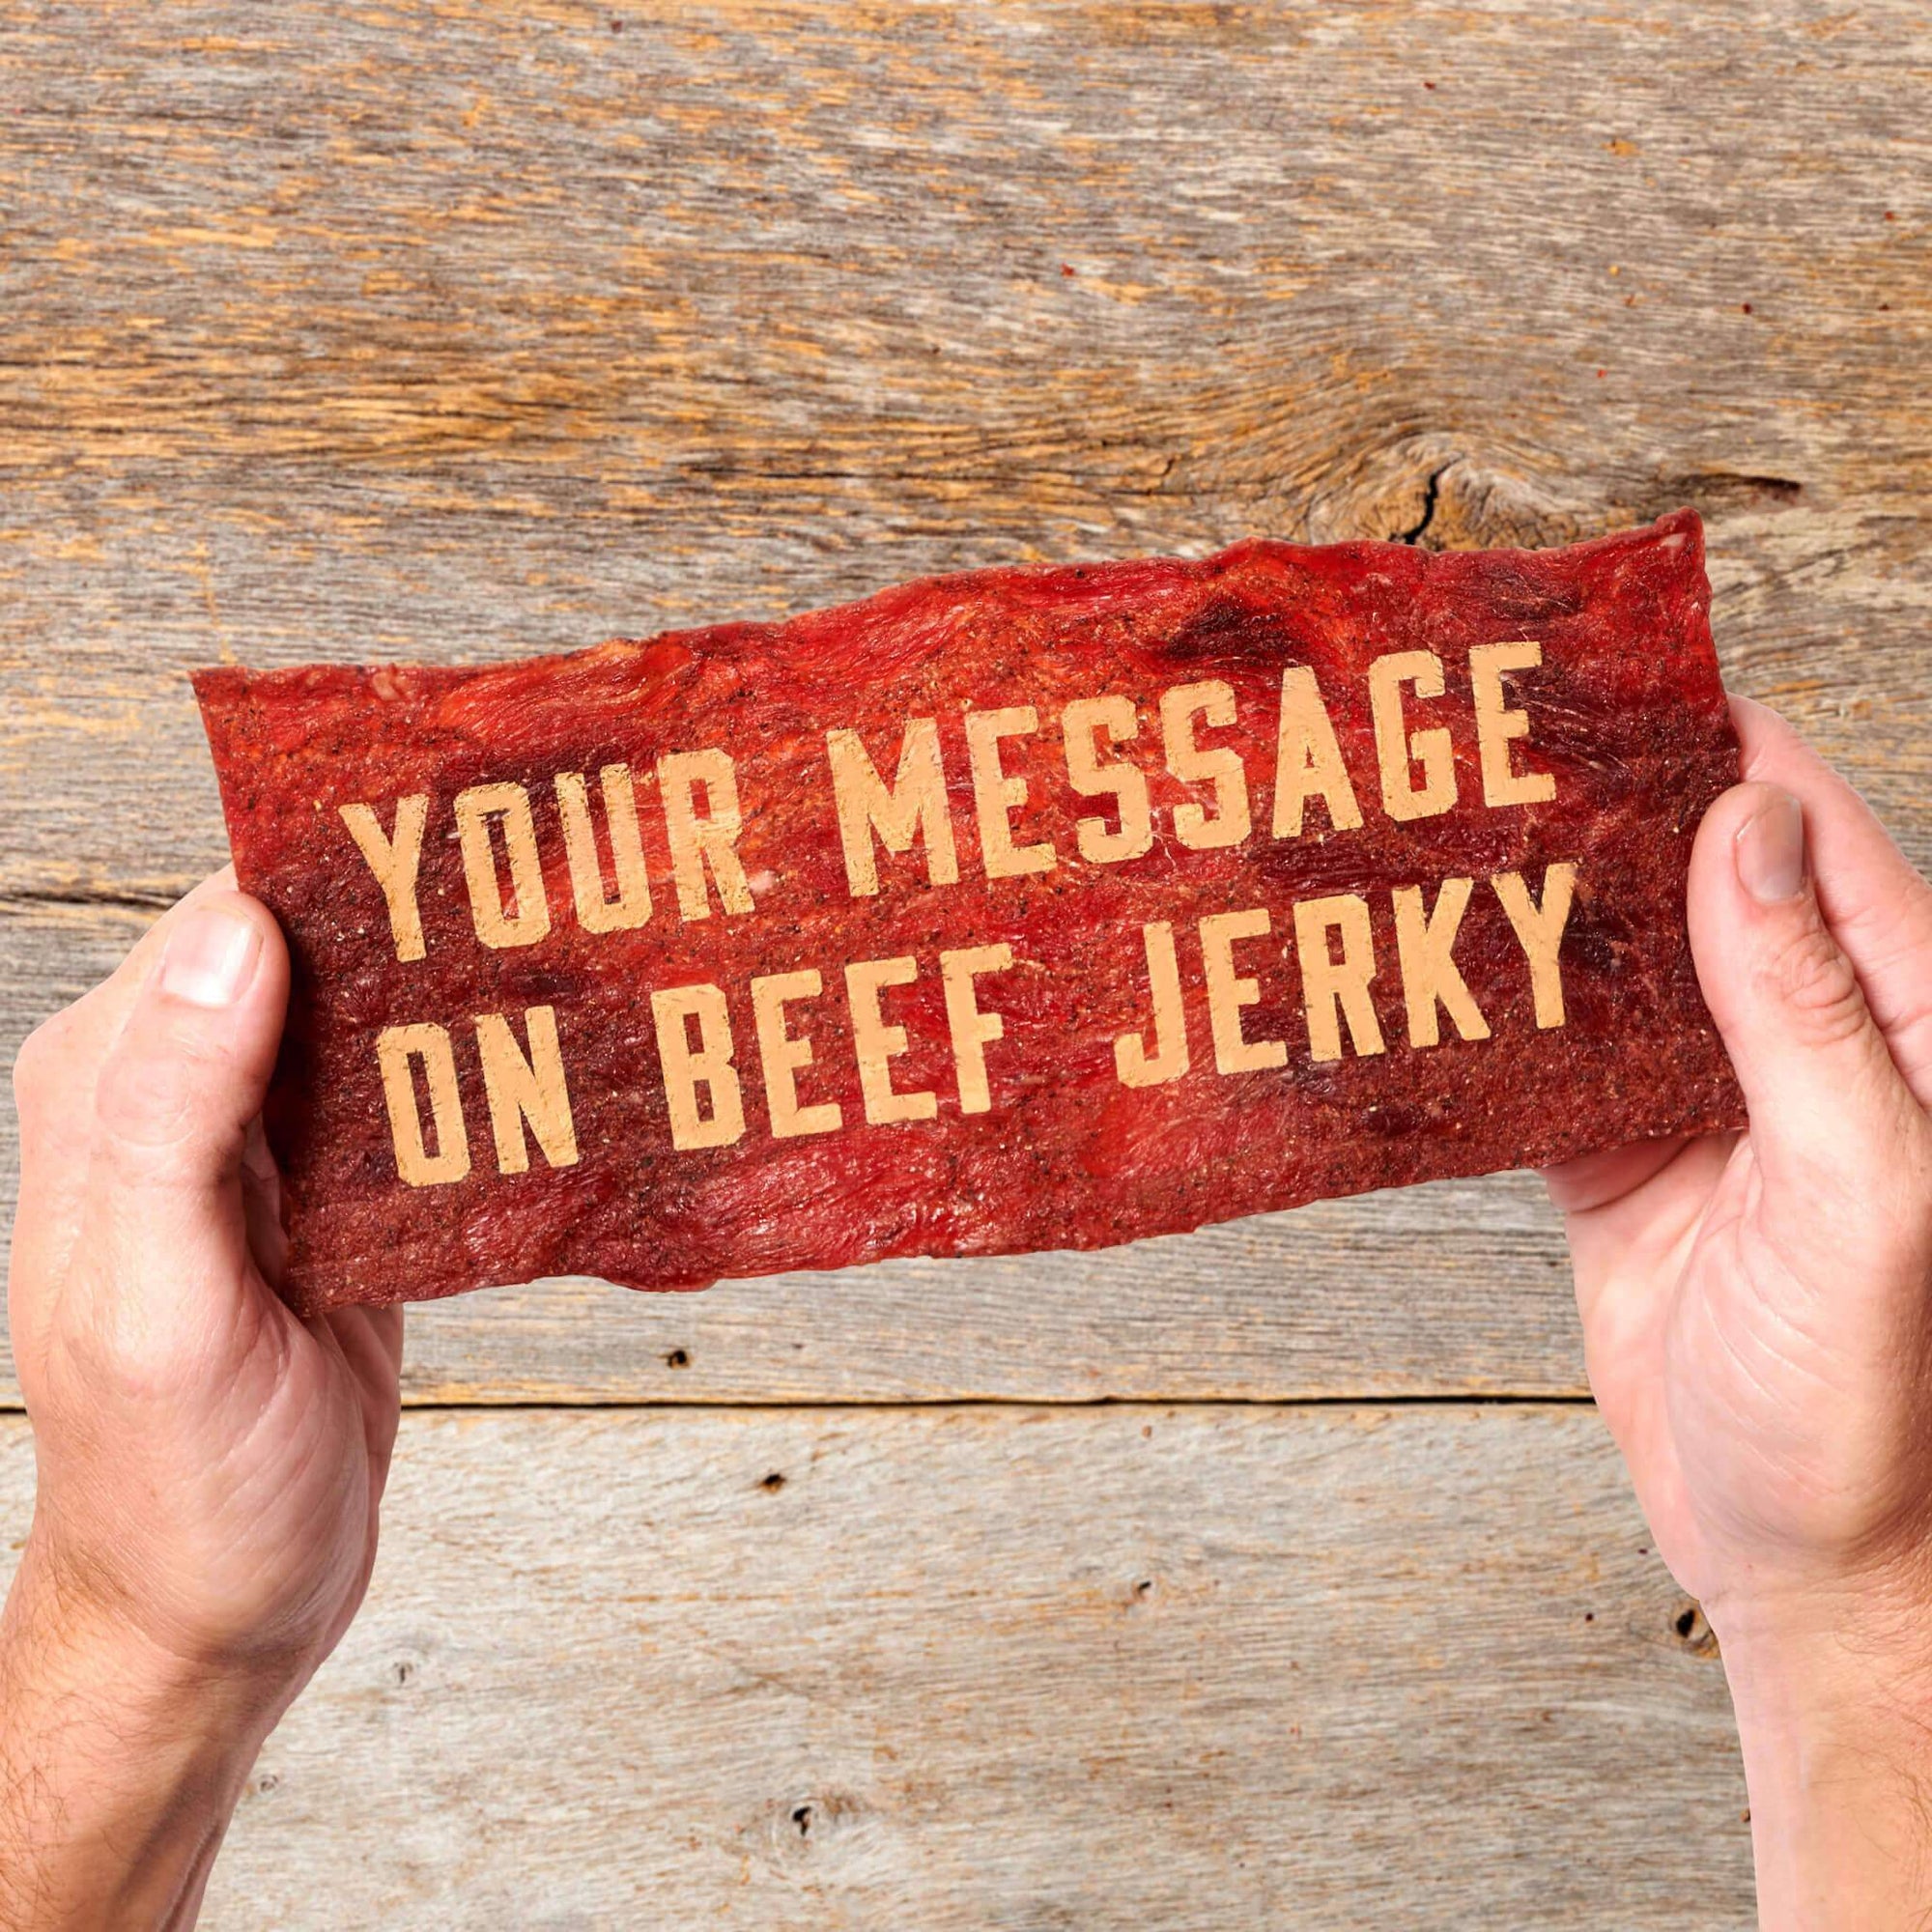 Custom edible meat greeting card that says "your message on beef jerky" and held by two hands, in front of wood panel background